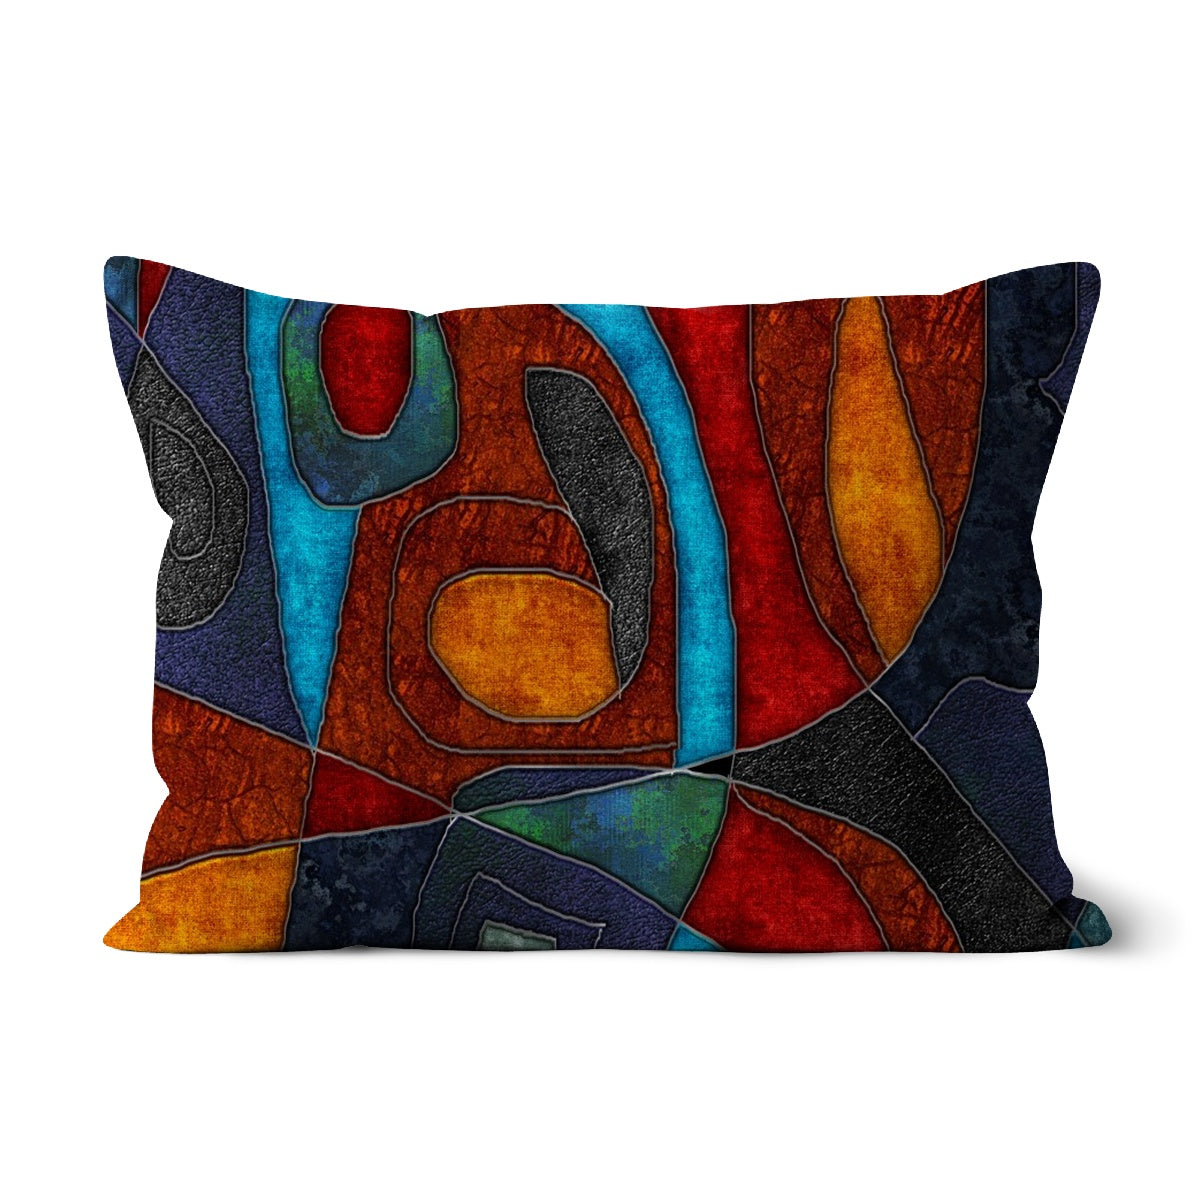 Abstract With Heart Cushion